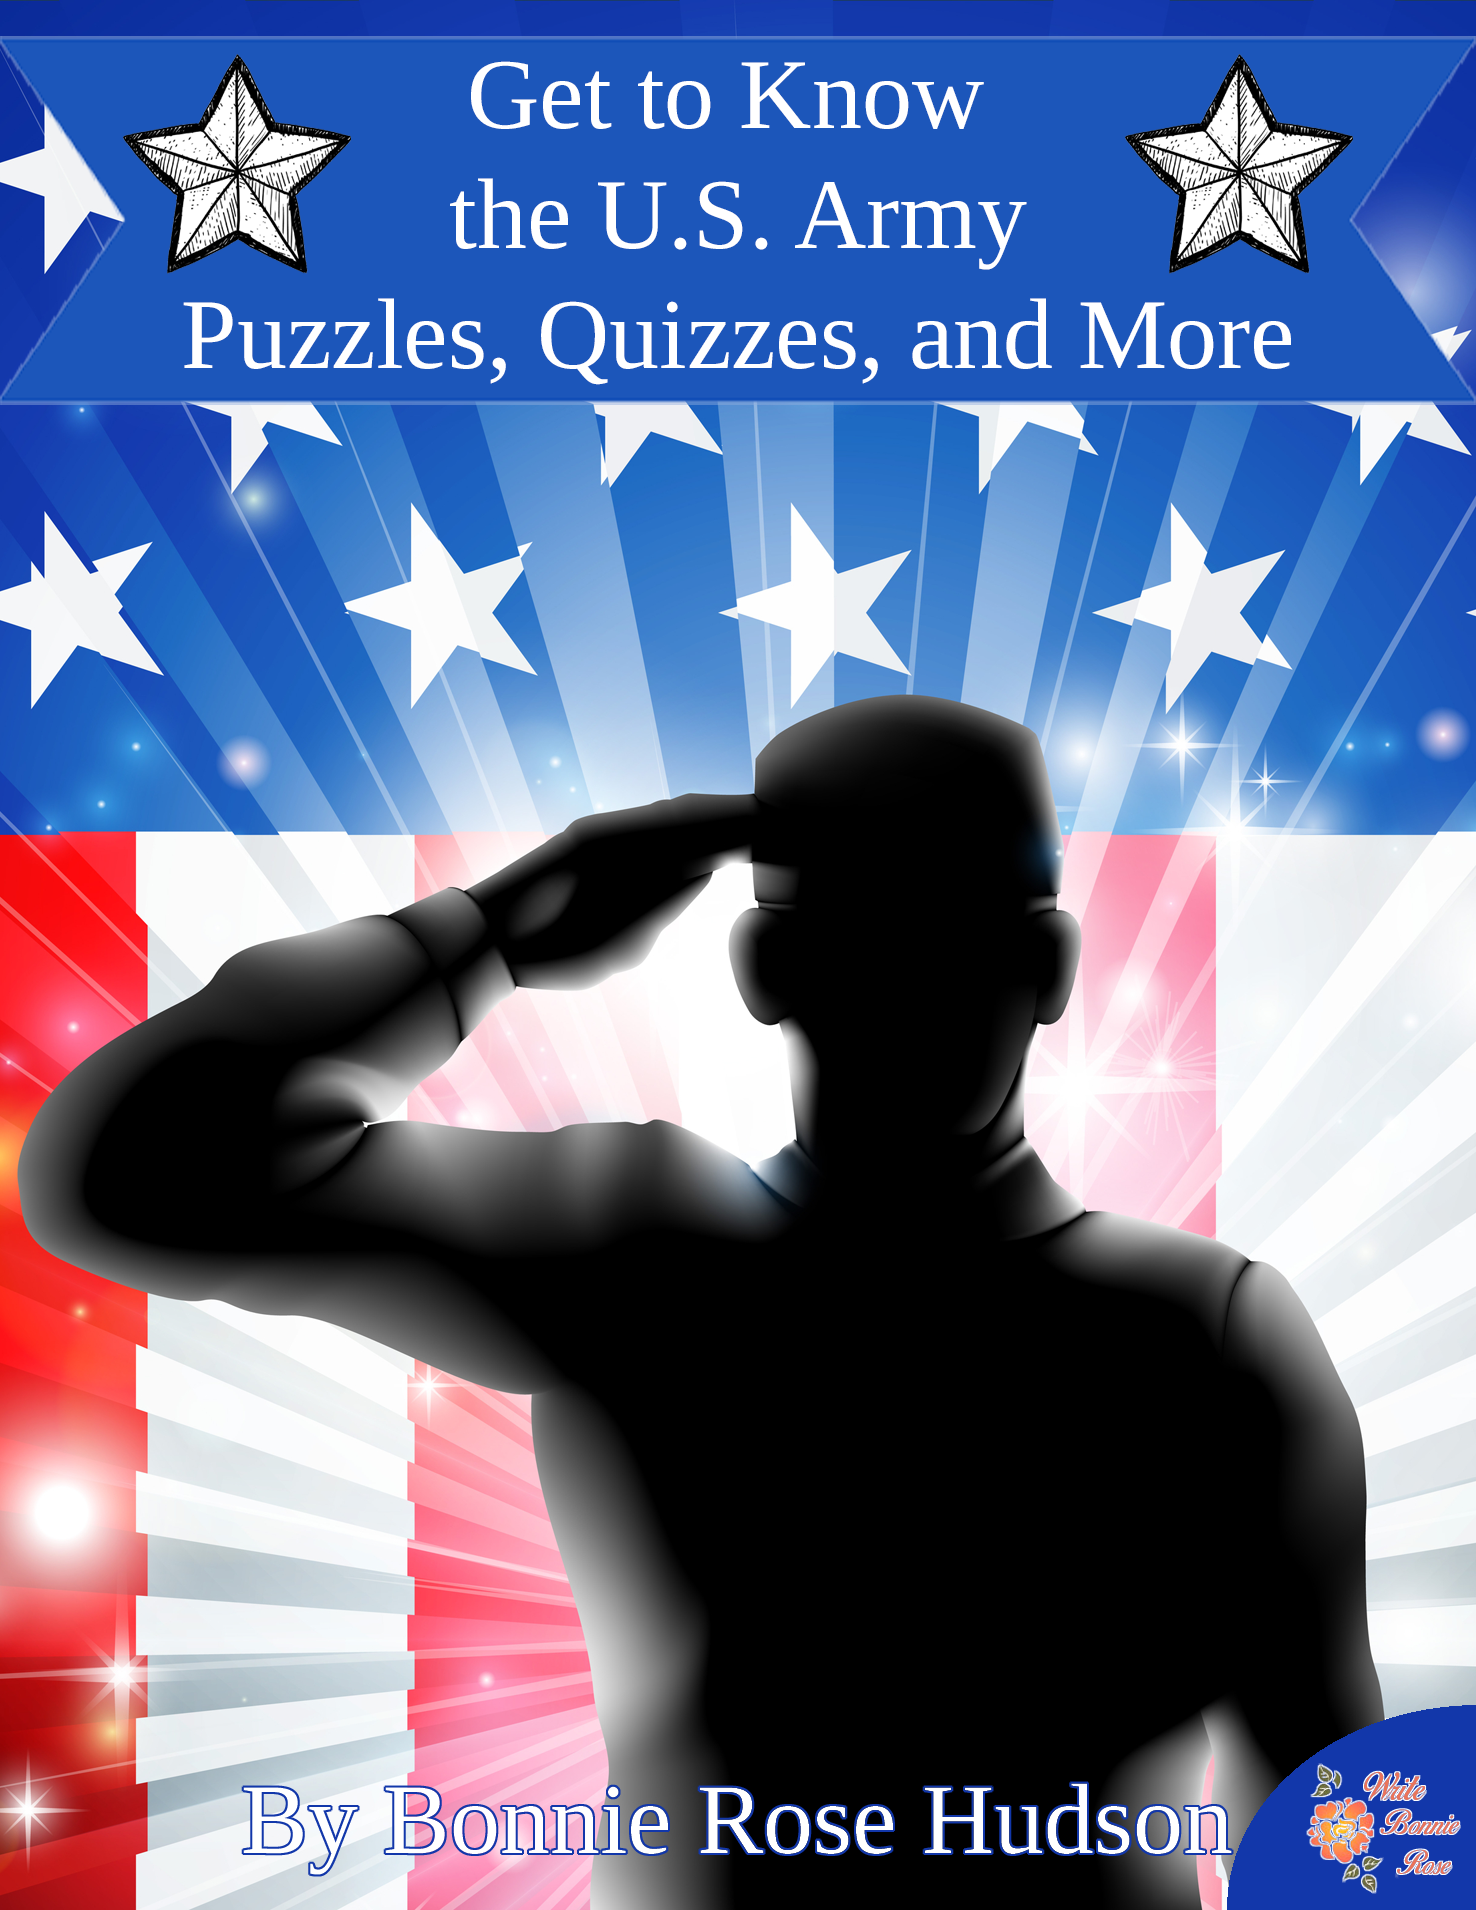 Get to Know the U.S. Army: Puzzles, Quizzes, and More - WriteBonnieRose.com